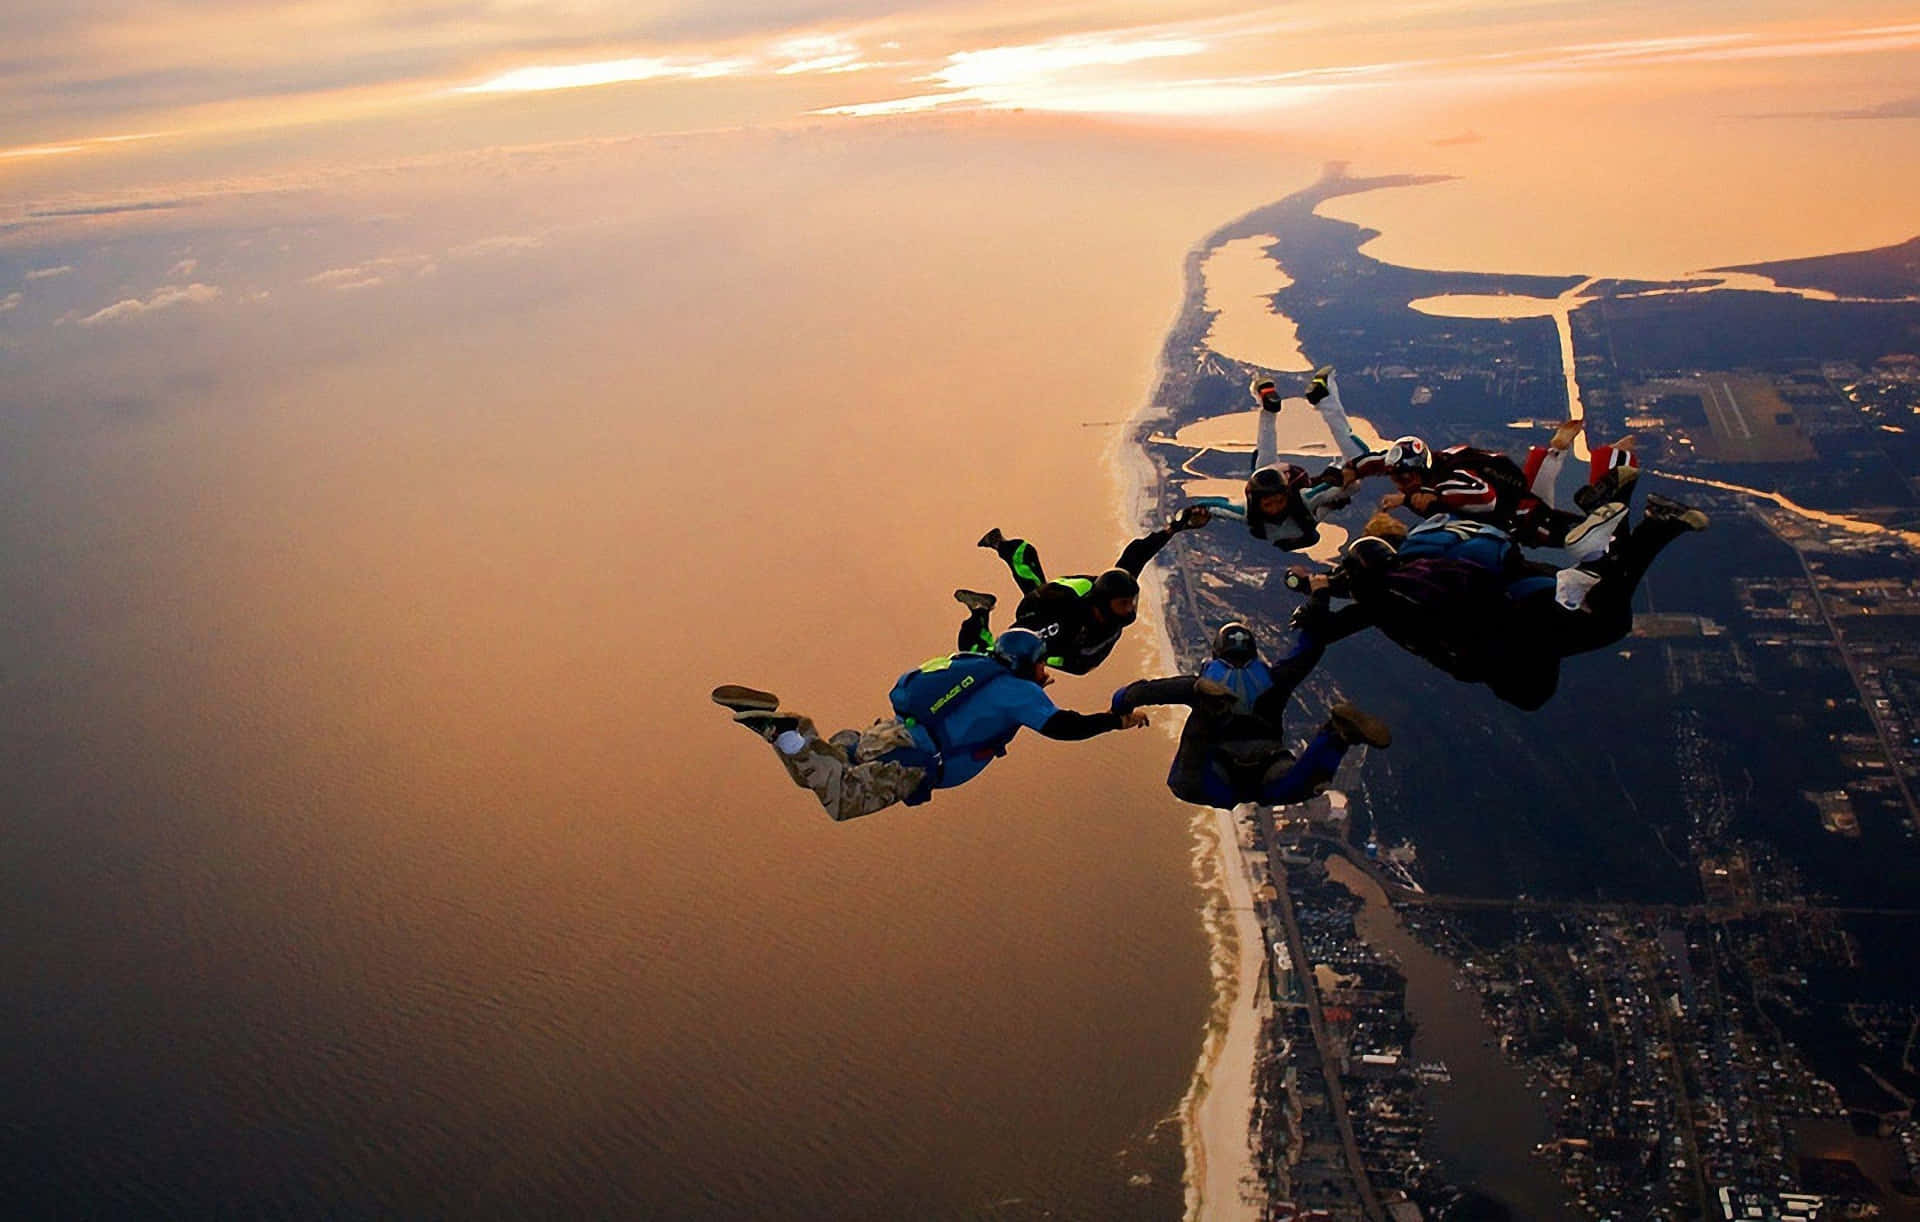 A Group Of People Are Skydiving Over The Ocean